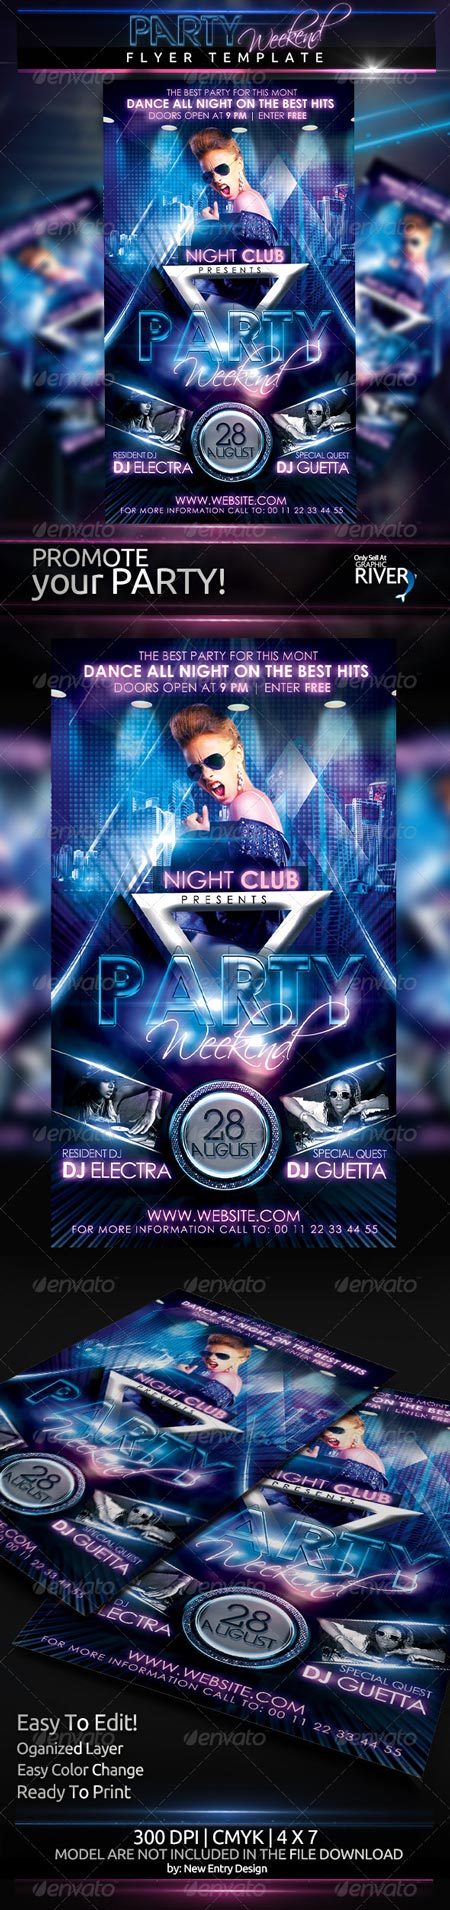 GraphicRiver Party Weekend Flyer Template 4676868